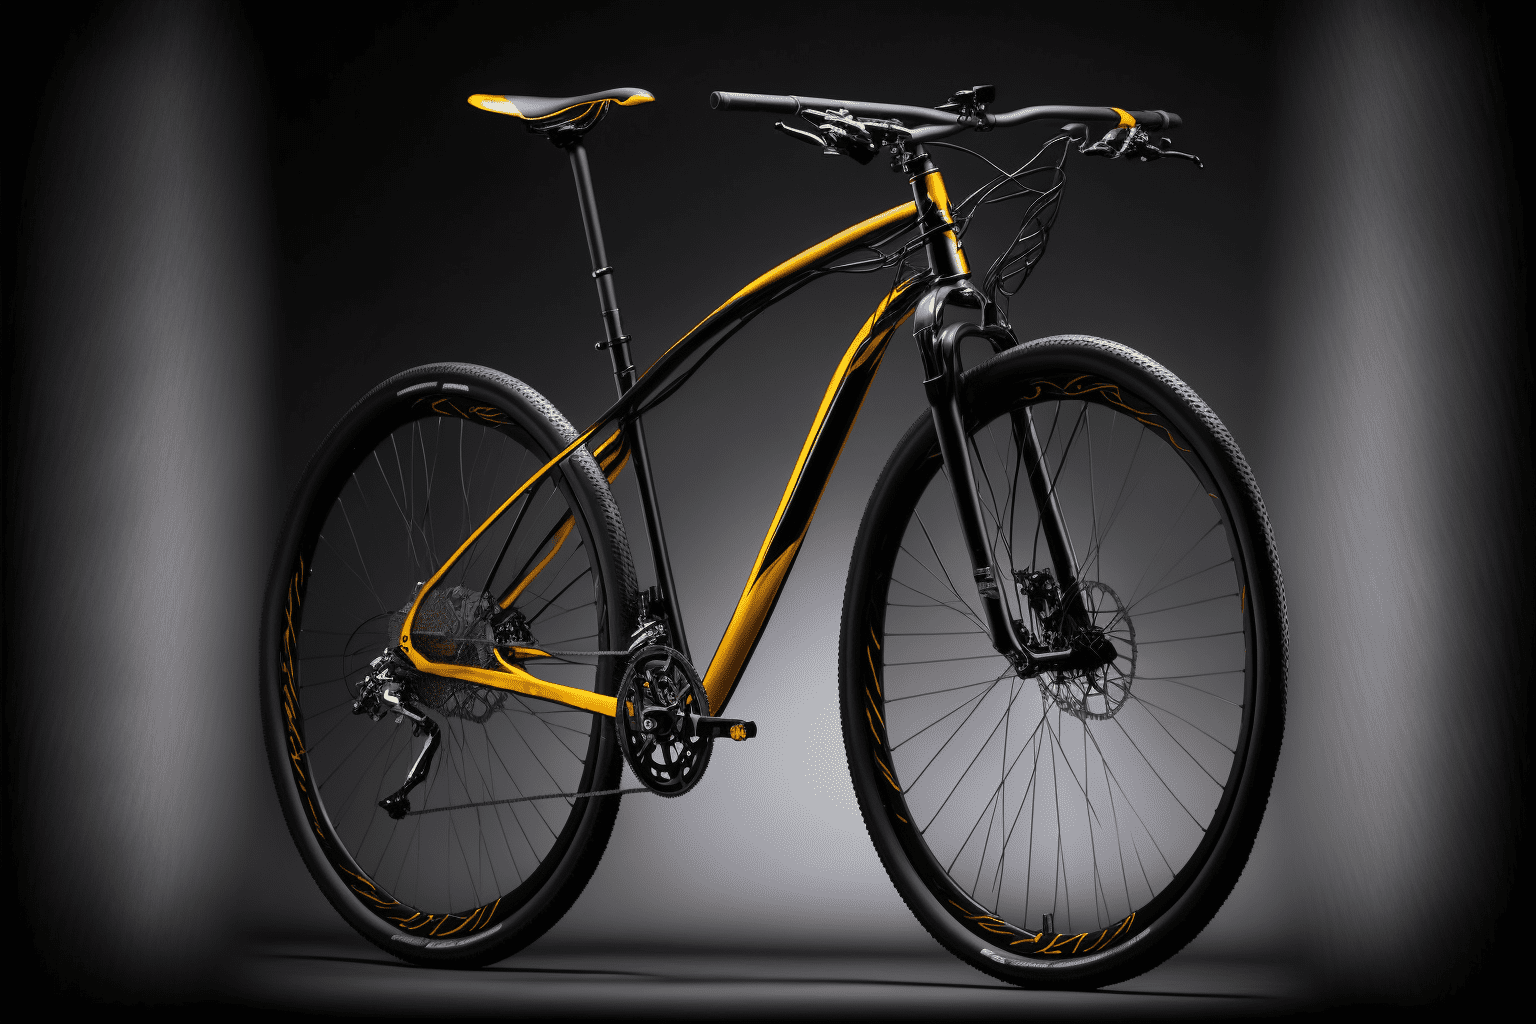 Going For Gold: Finding The Lightest Hybrid Bike For Your Commute Or Adventure